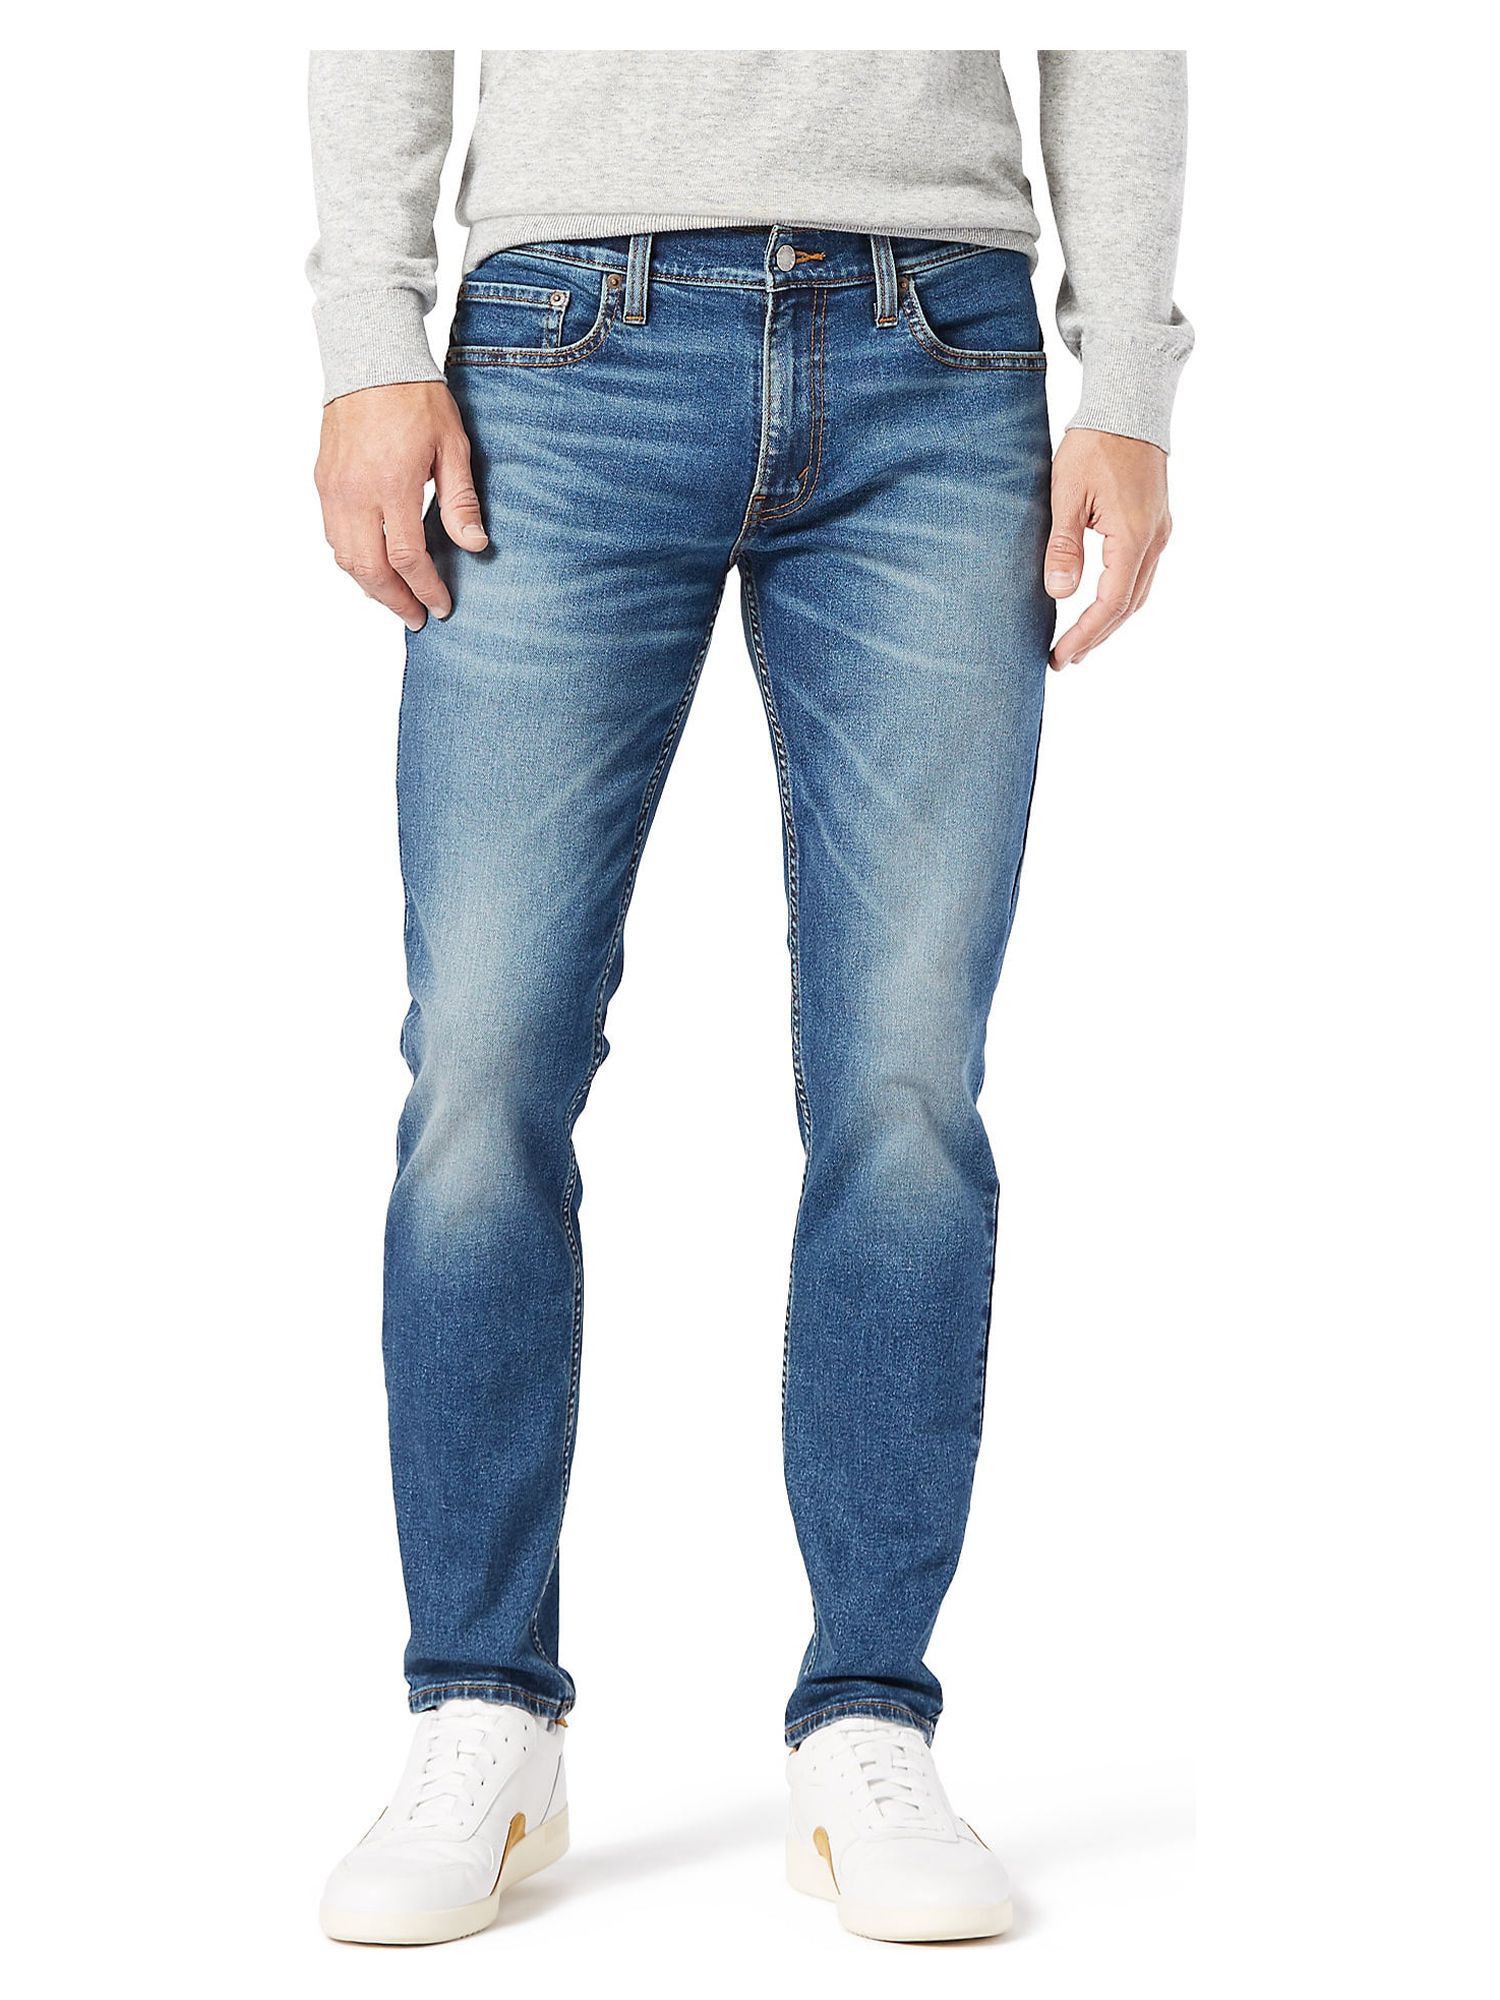 Signature by Levi Strauss & Co. Men’s and Big and Tall Slim Fit Jeans - image 1 of 6